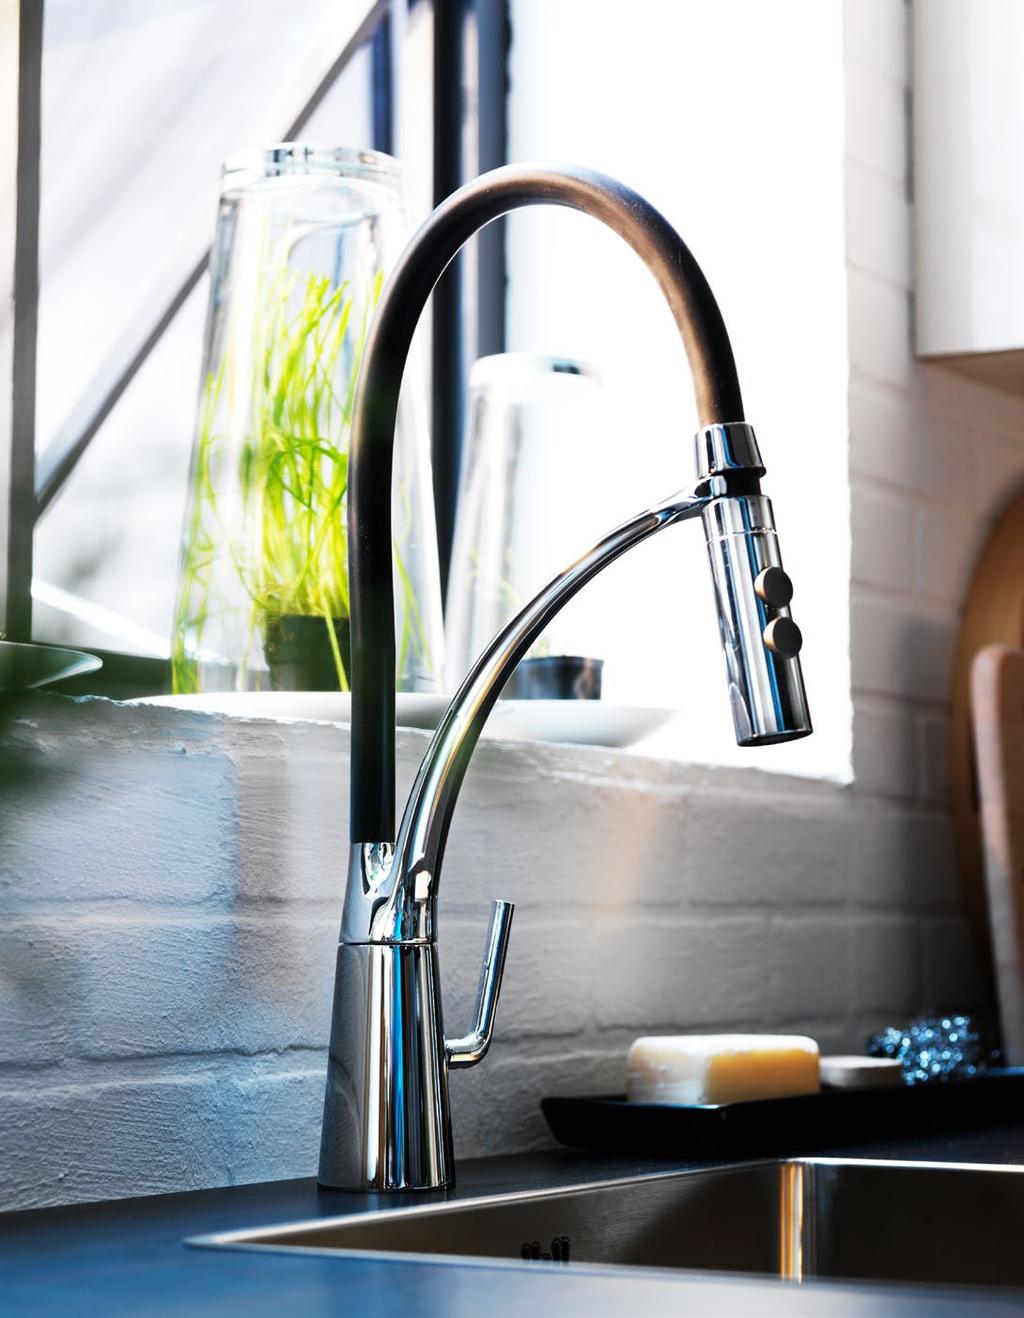 26 27 TAPs Our taps are designed to fit your sink and suit your kitchen needs.